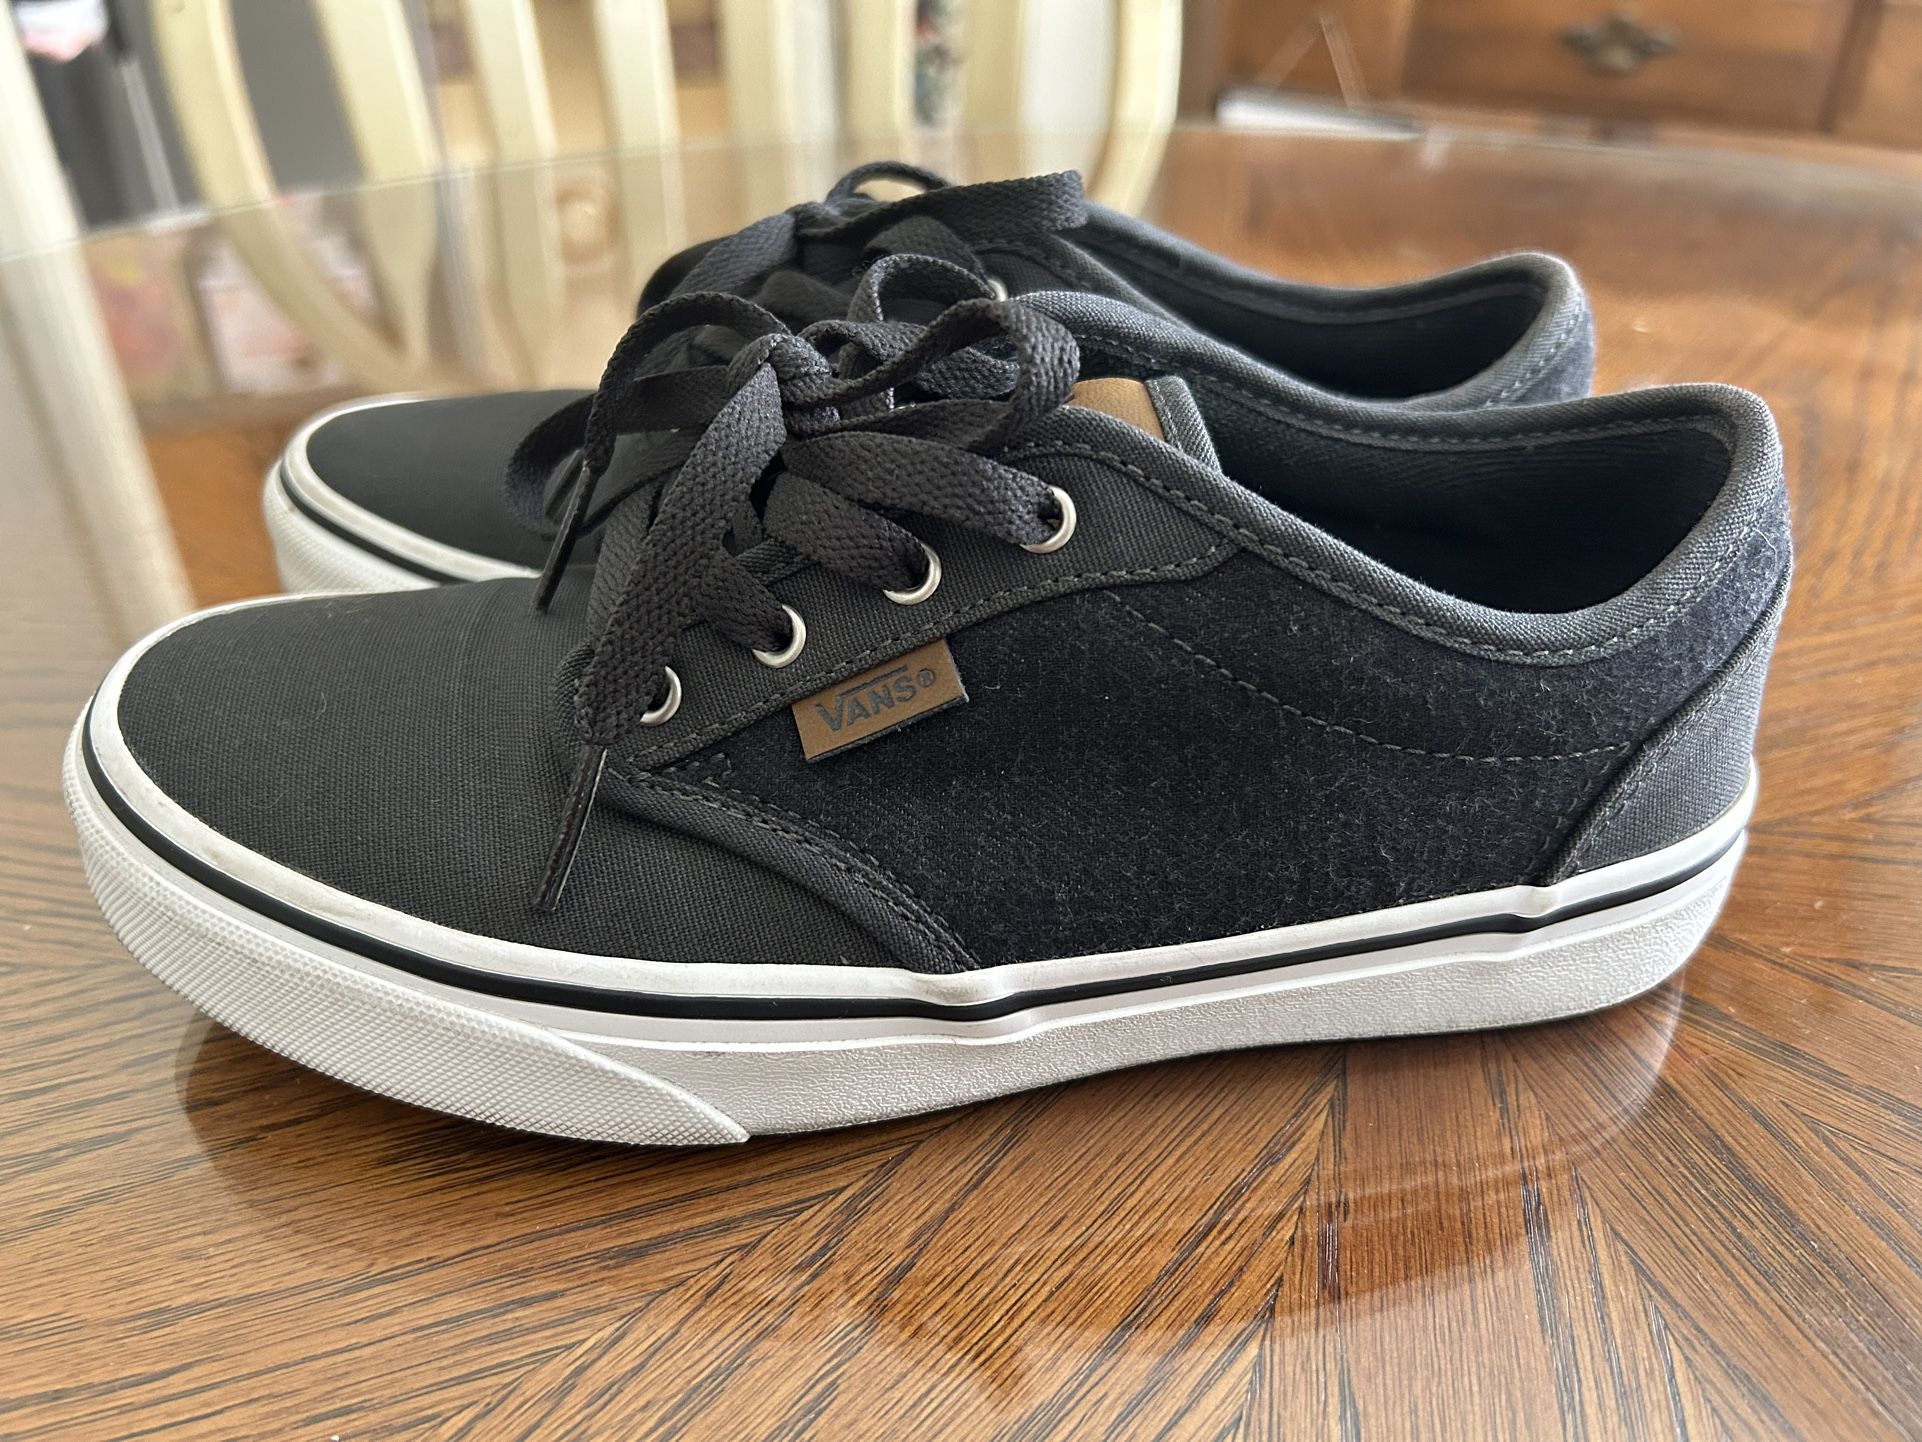 Youth Vans (Great Condition!)